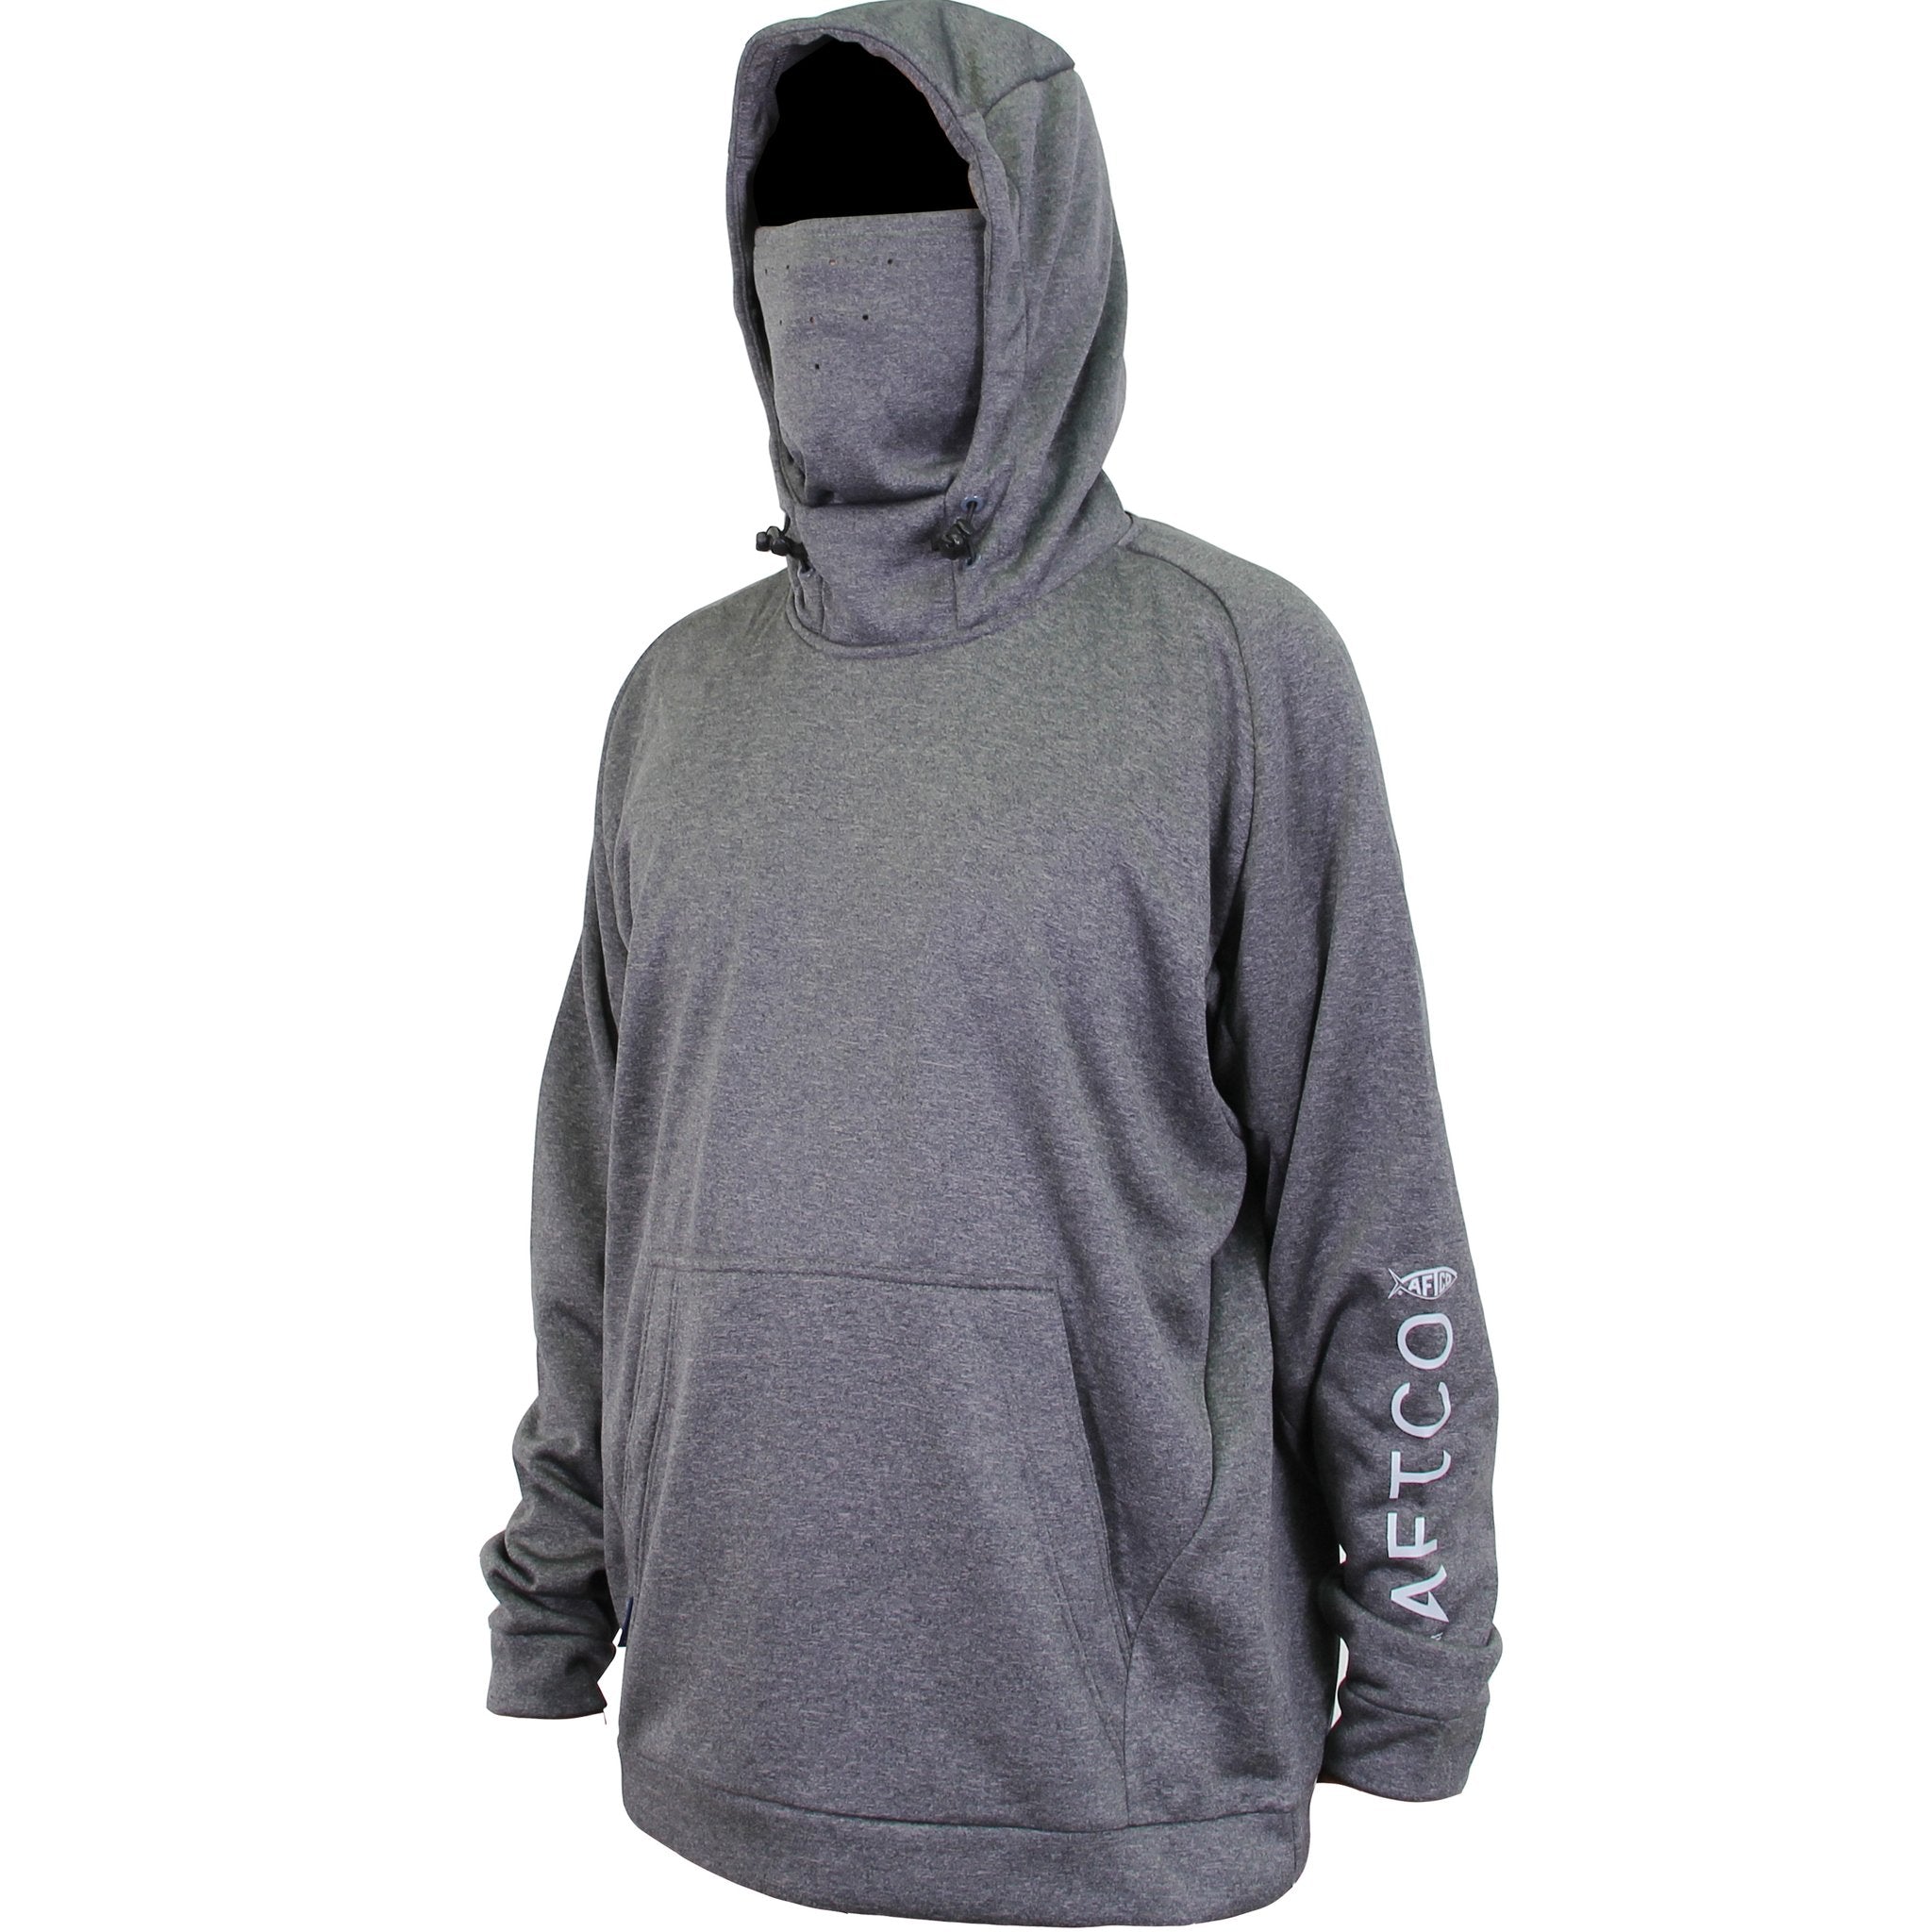 AFTCO Reaper Technical Fishing Hoodie - Charcoal Heather - 3XL